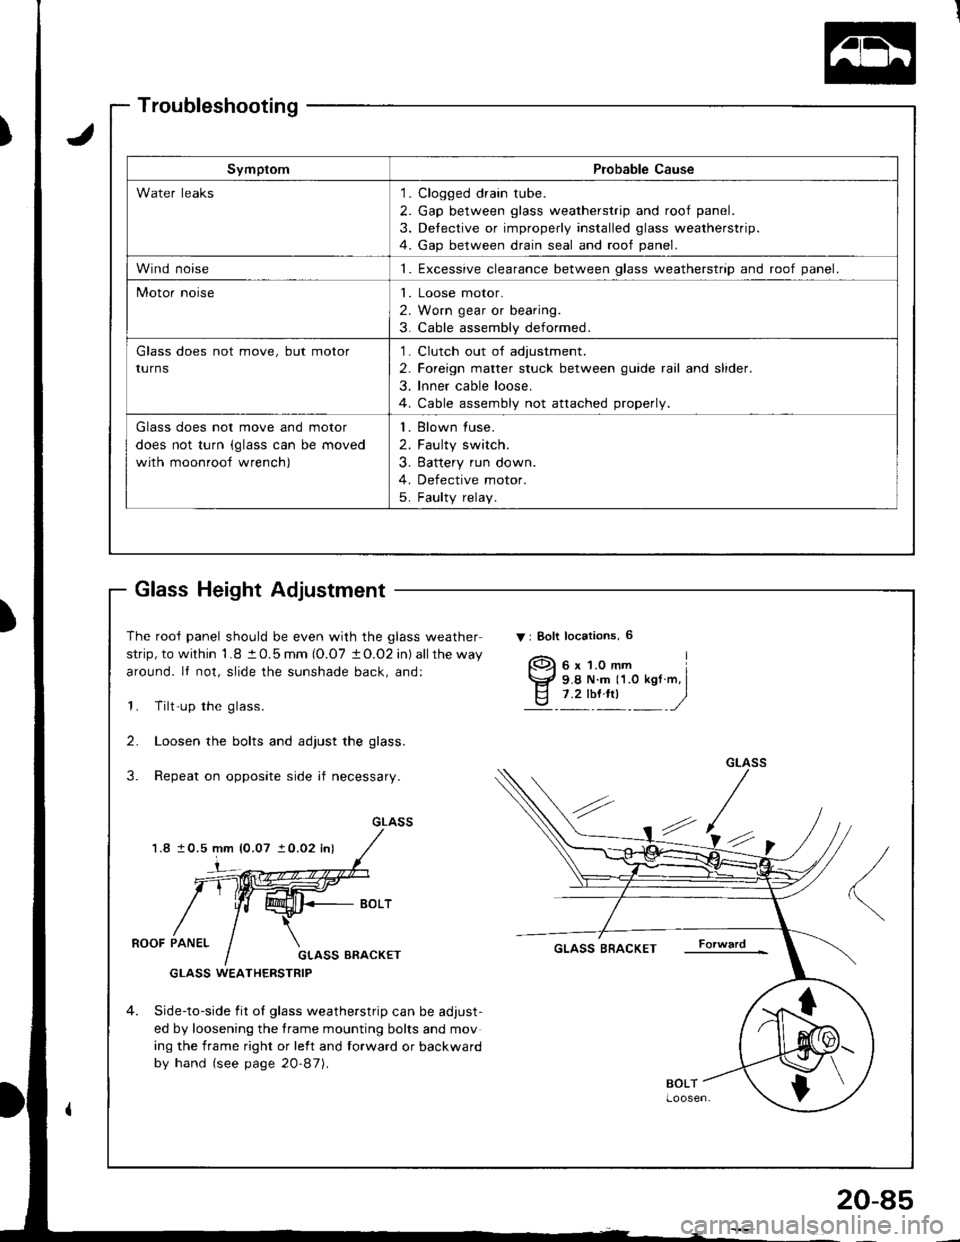 HONDA INTEGRA 1998 4.G Owners Guide )
Troubleshooting
Glass Height Adjustment
The rooJ panel should be even with the glass weather
strip, to within 1.8 t 0.5 mm (O.O7 tO.O2 in) allthe way
around. It not, slide the sunshade back, and:
1.